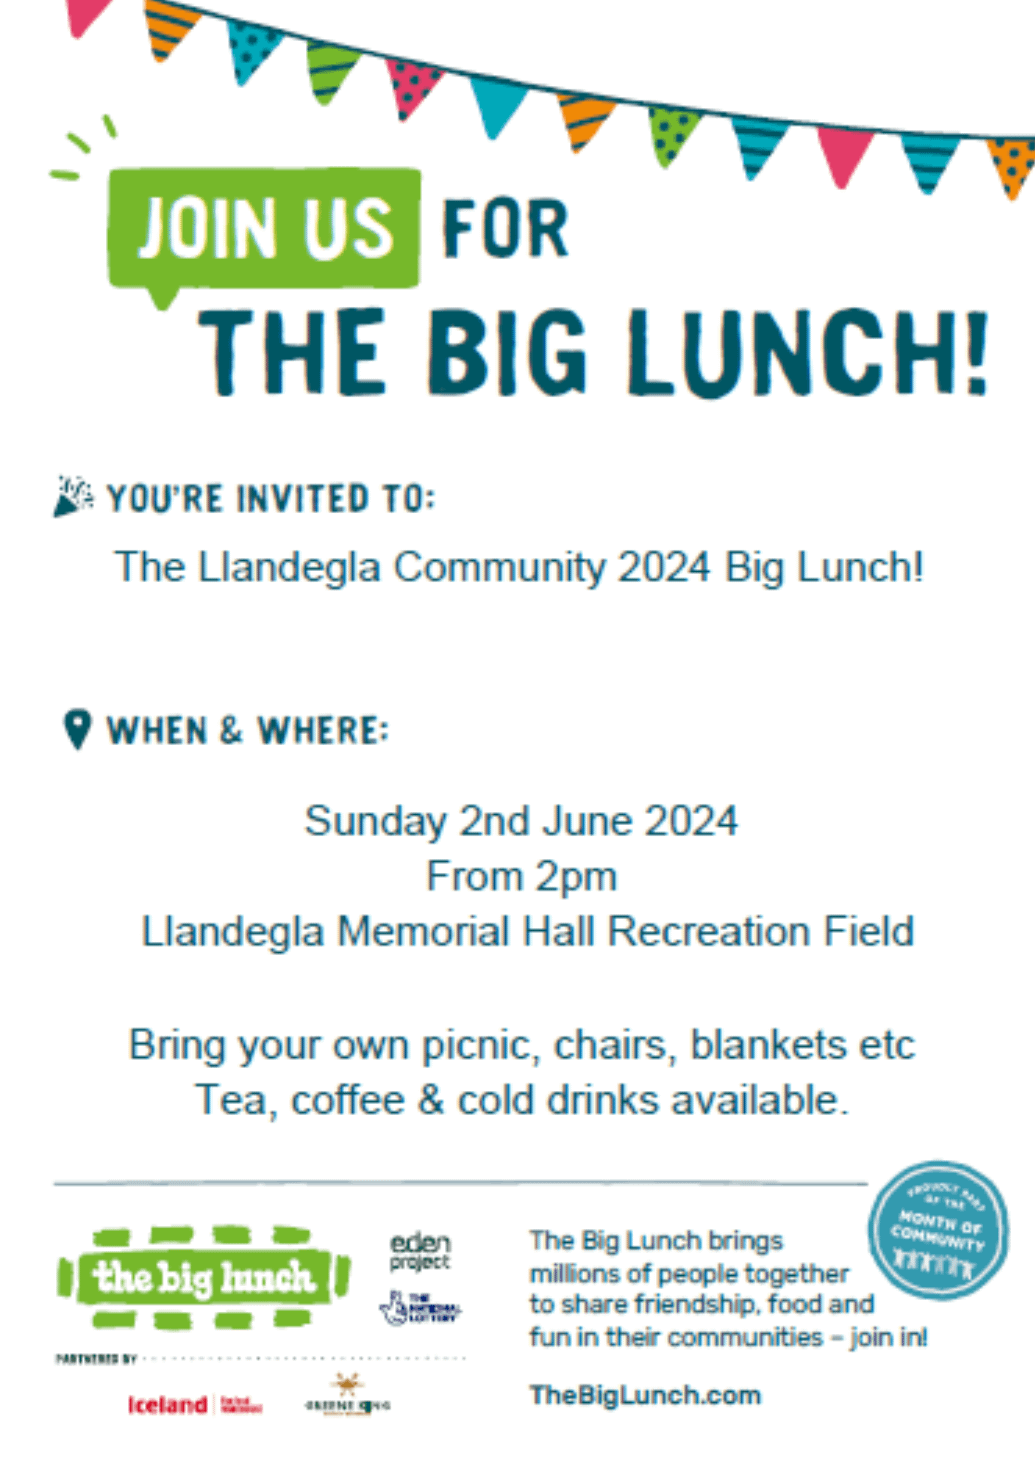 The 2024 Big Lunch is nearly here! Are you coming?